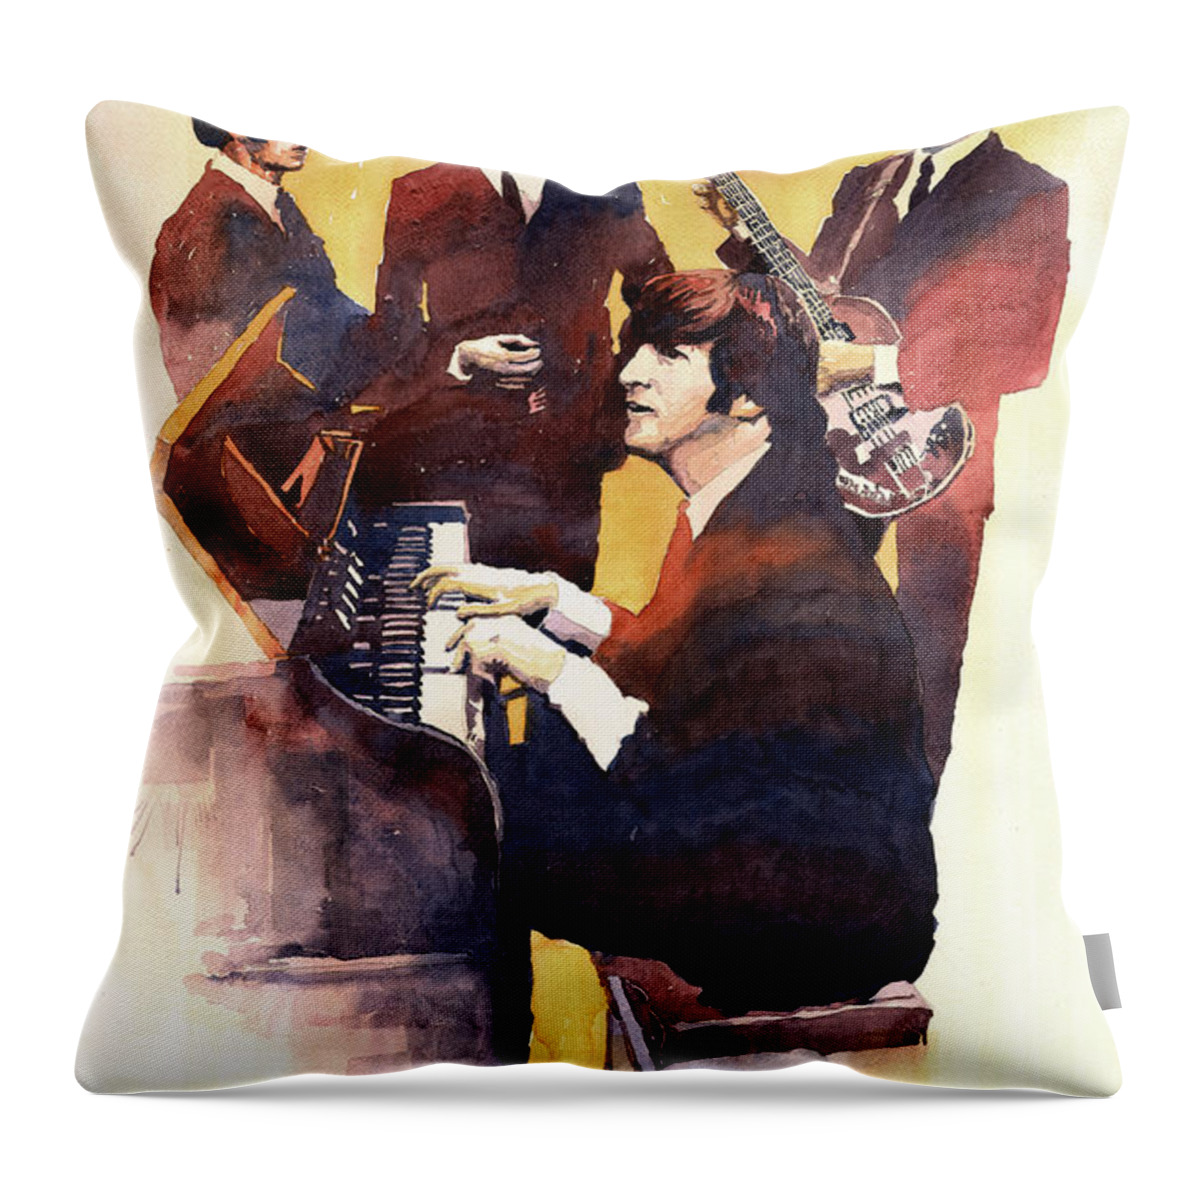 Watercolor Throw Pillow featuring the painting The Beatles 01 by Yuriy Shevchuk